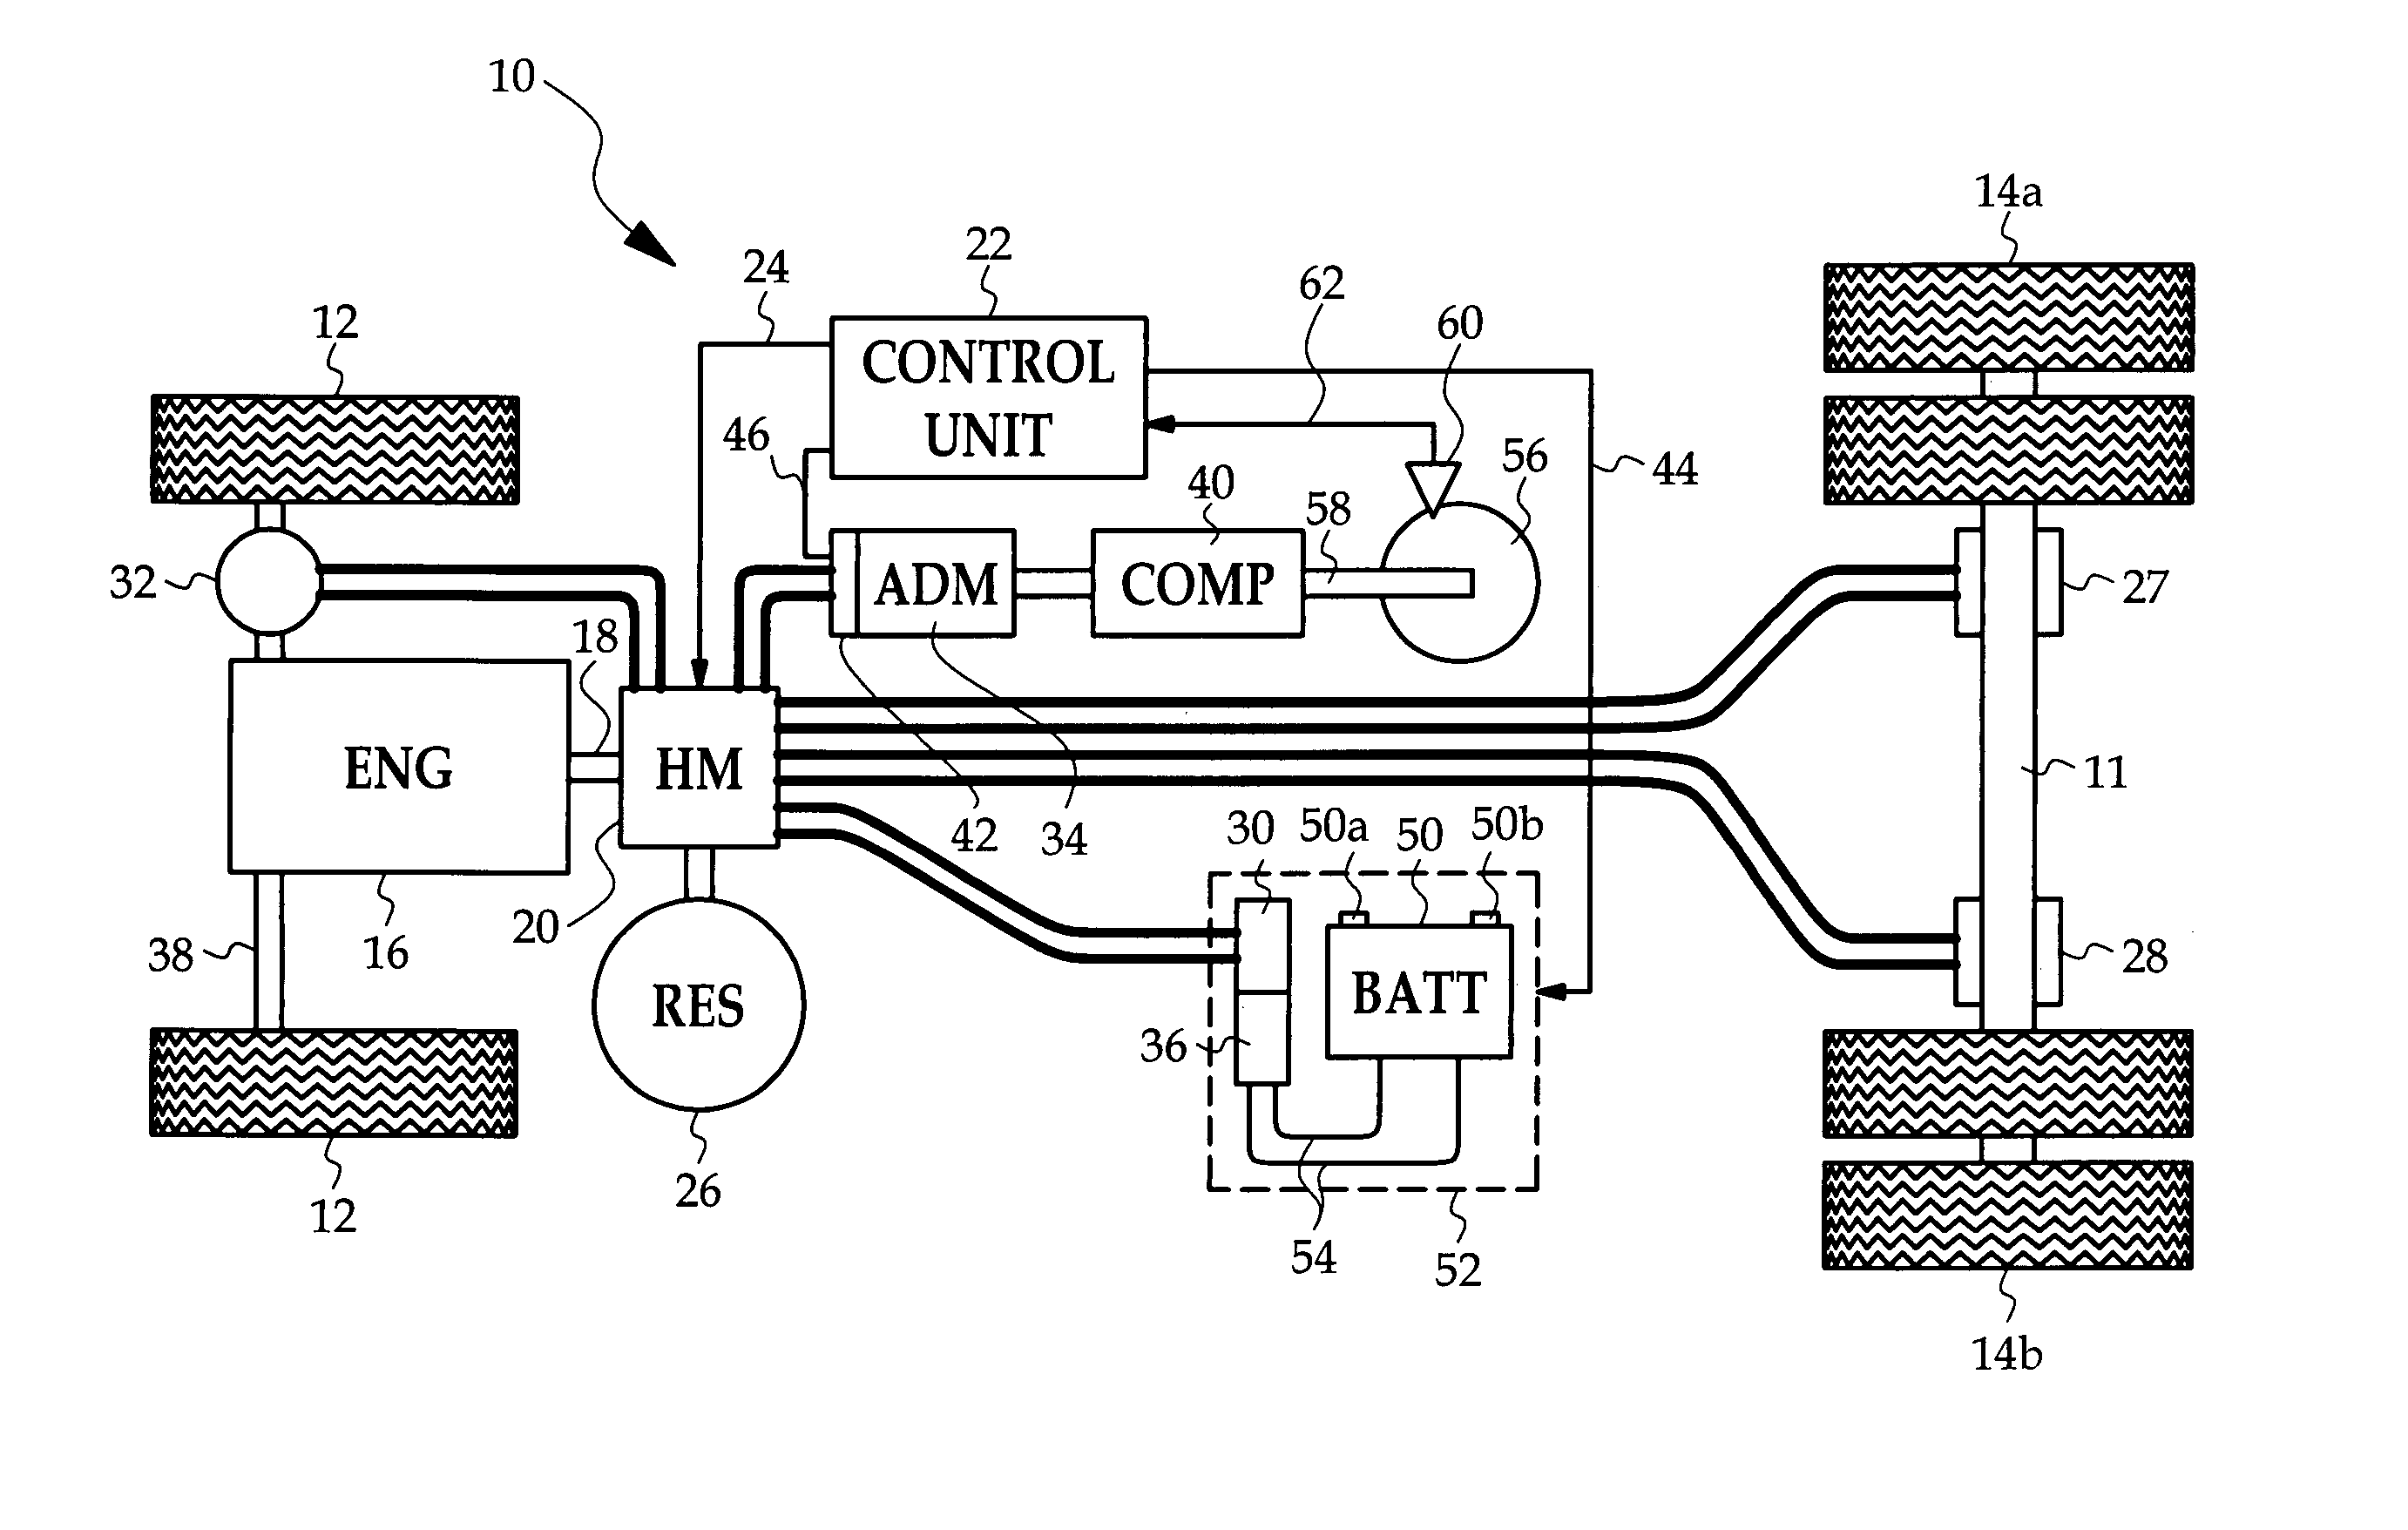 Hydrostatic drive apparatus for a road vehicle